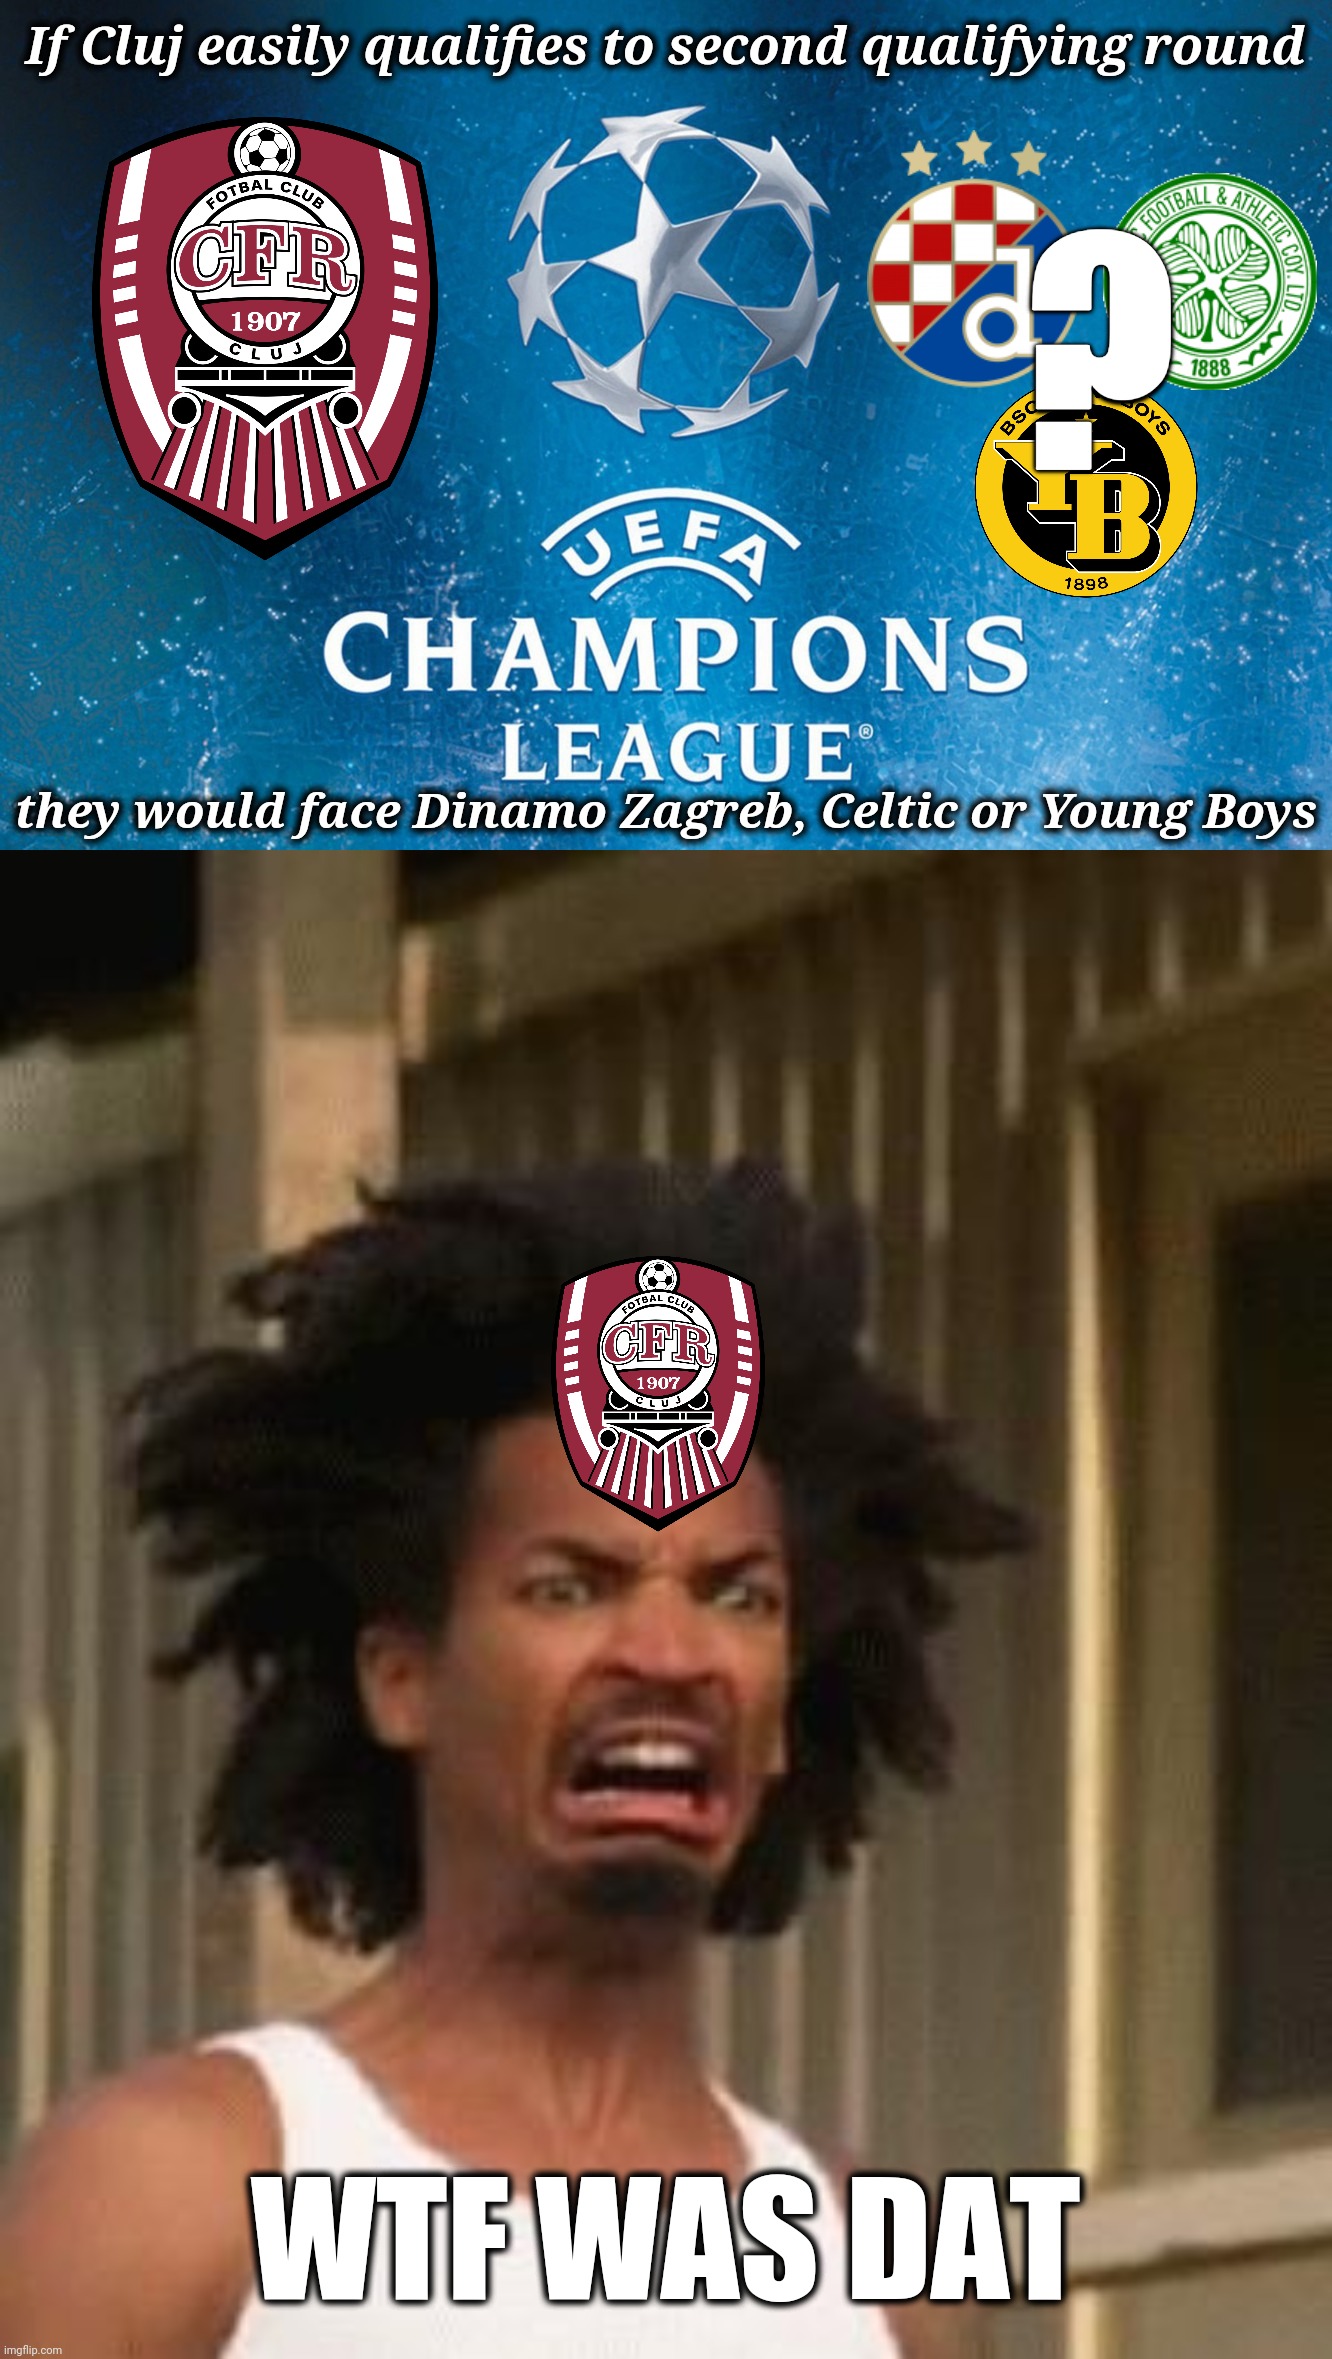 CLUJ - Celtic (again)/Dinamo Zagreb/Young Boys in Champions League second qualifying round | If Cluj easily qualifies to second qualifying round; ? they would face Dinamo Zagreb, Celtic or Young Boys; WTF WAS DAT | image tagged in memes,champions league,funny,football,soccer | made w/ Imgflip meme maker